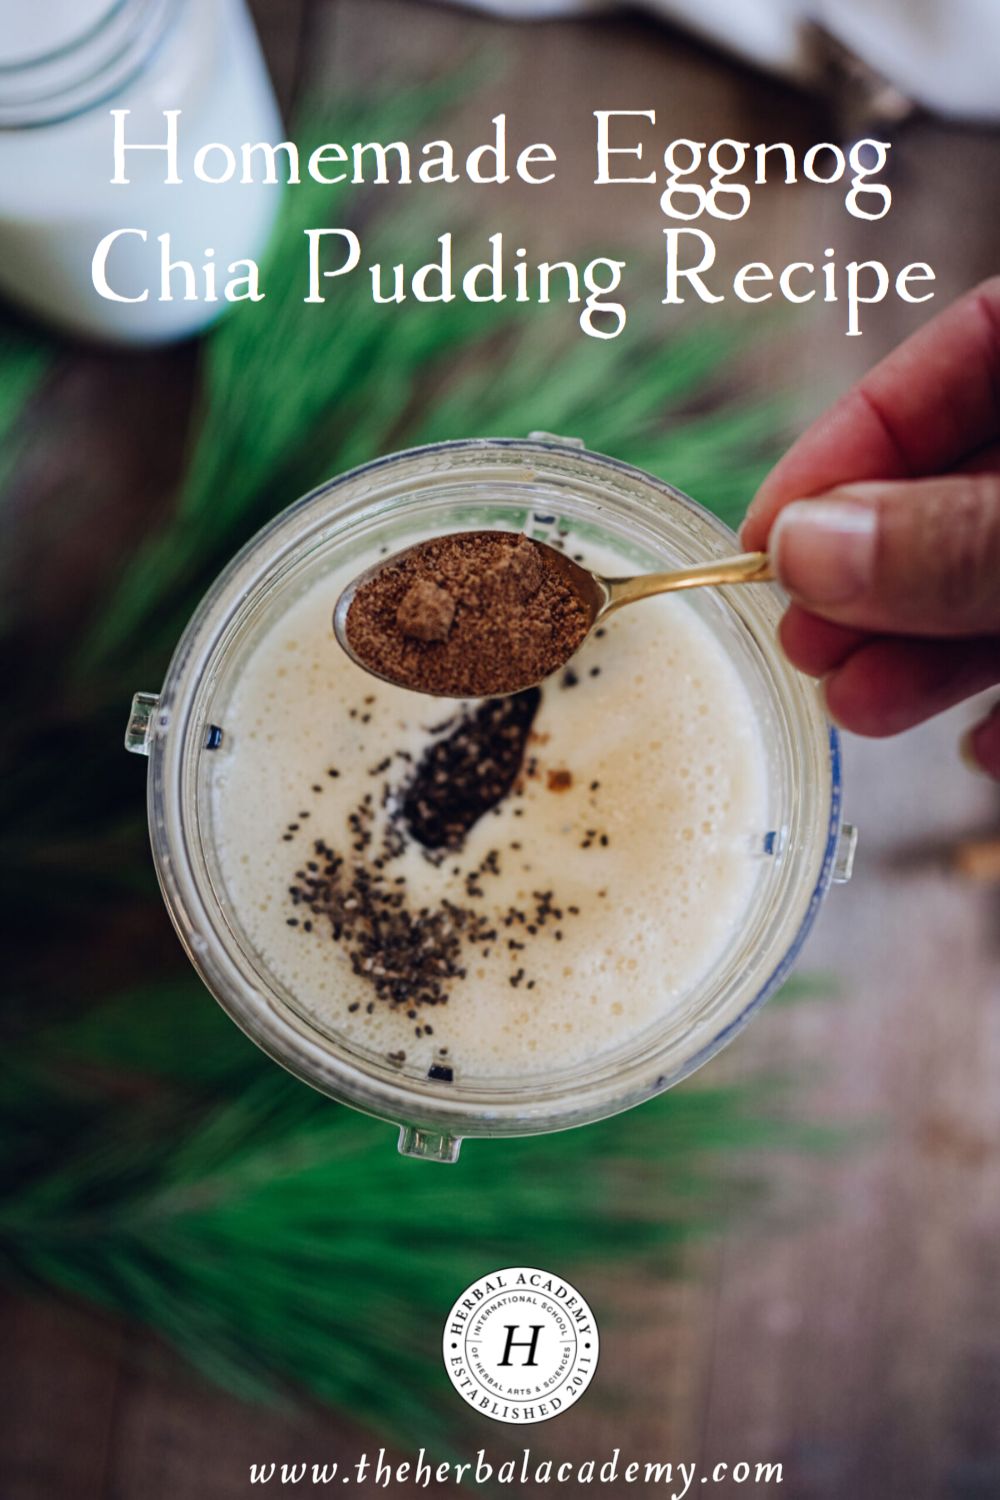 Homemade Eggnog Chia Pudding Recipe | Herbal Academy | Eggnog chia pudding is a wonderful dish full of warm spices that feels like the holidays and perfect for a morning snack, or holiday brunch.